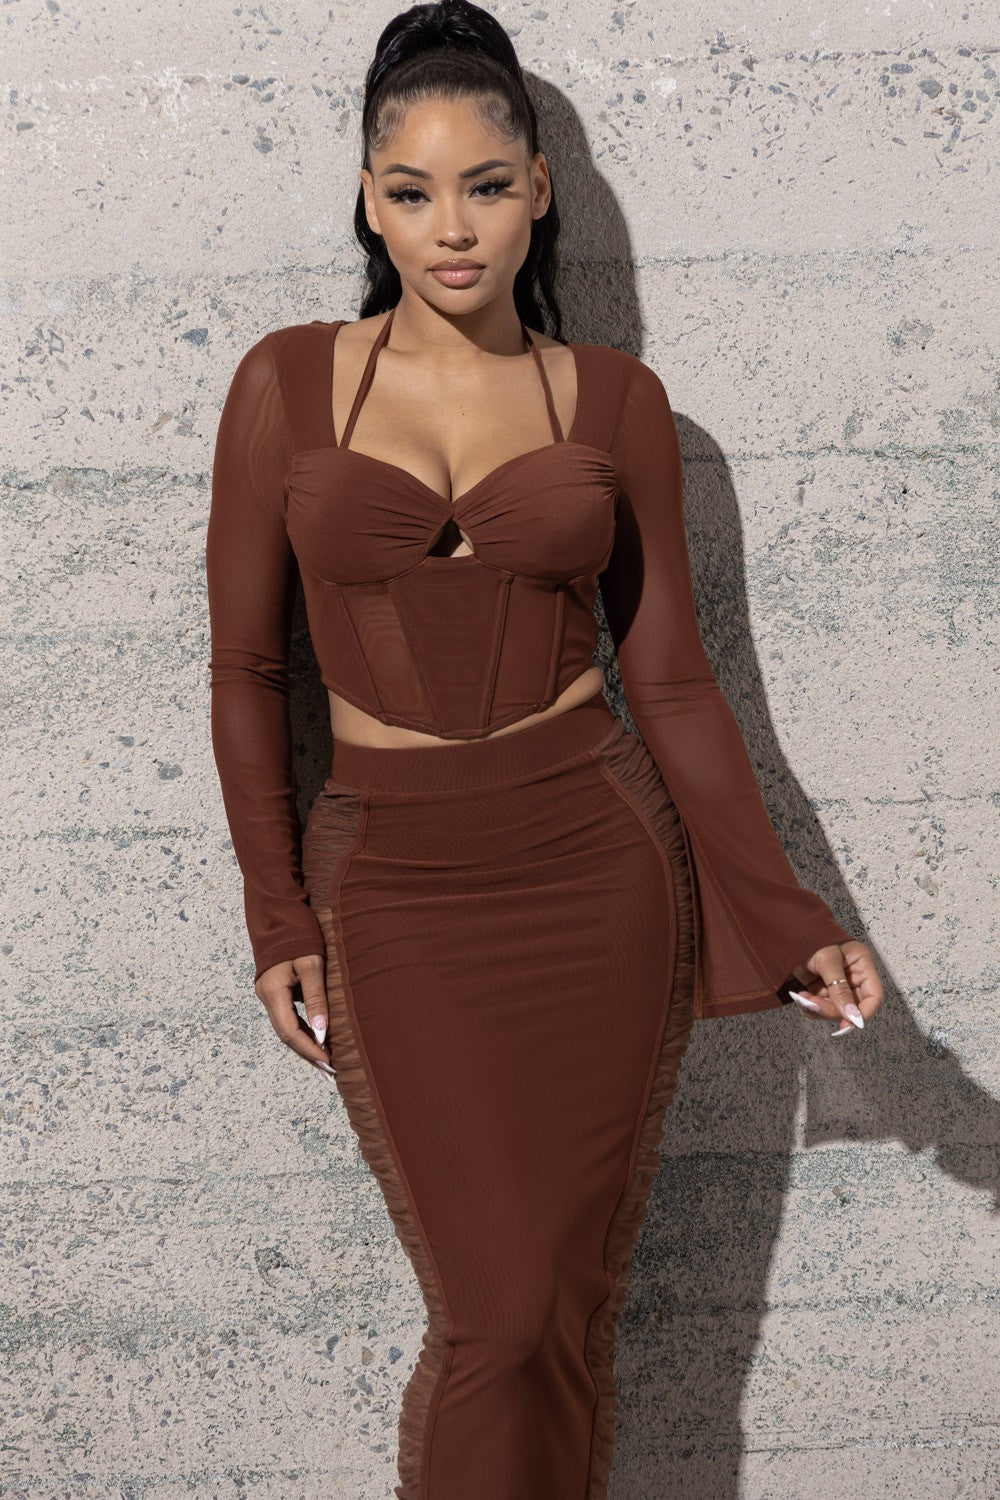 Paris Two Piece Mesh Bustier Top And Skirt Set